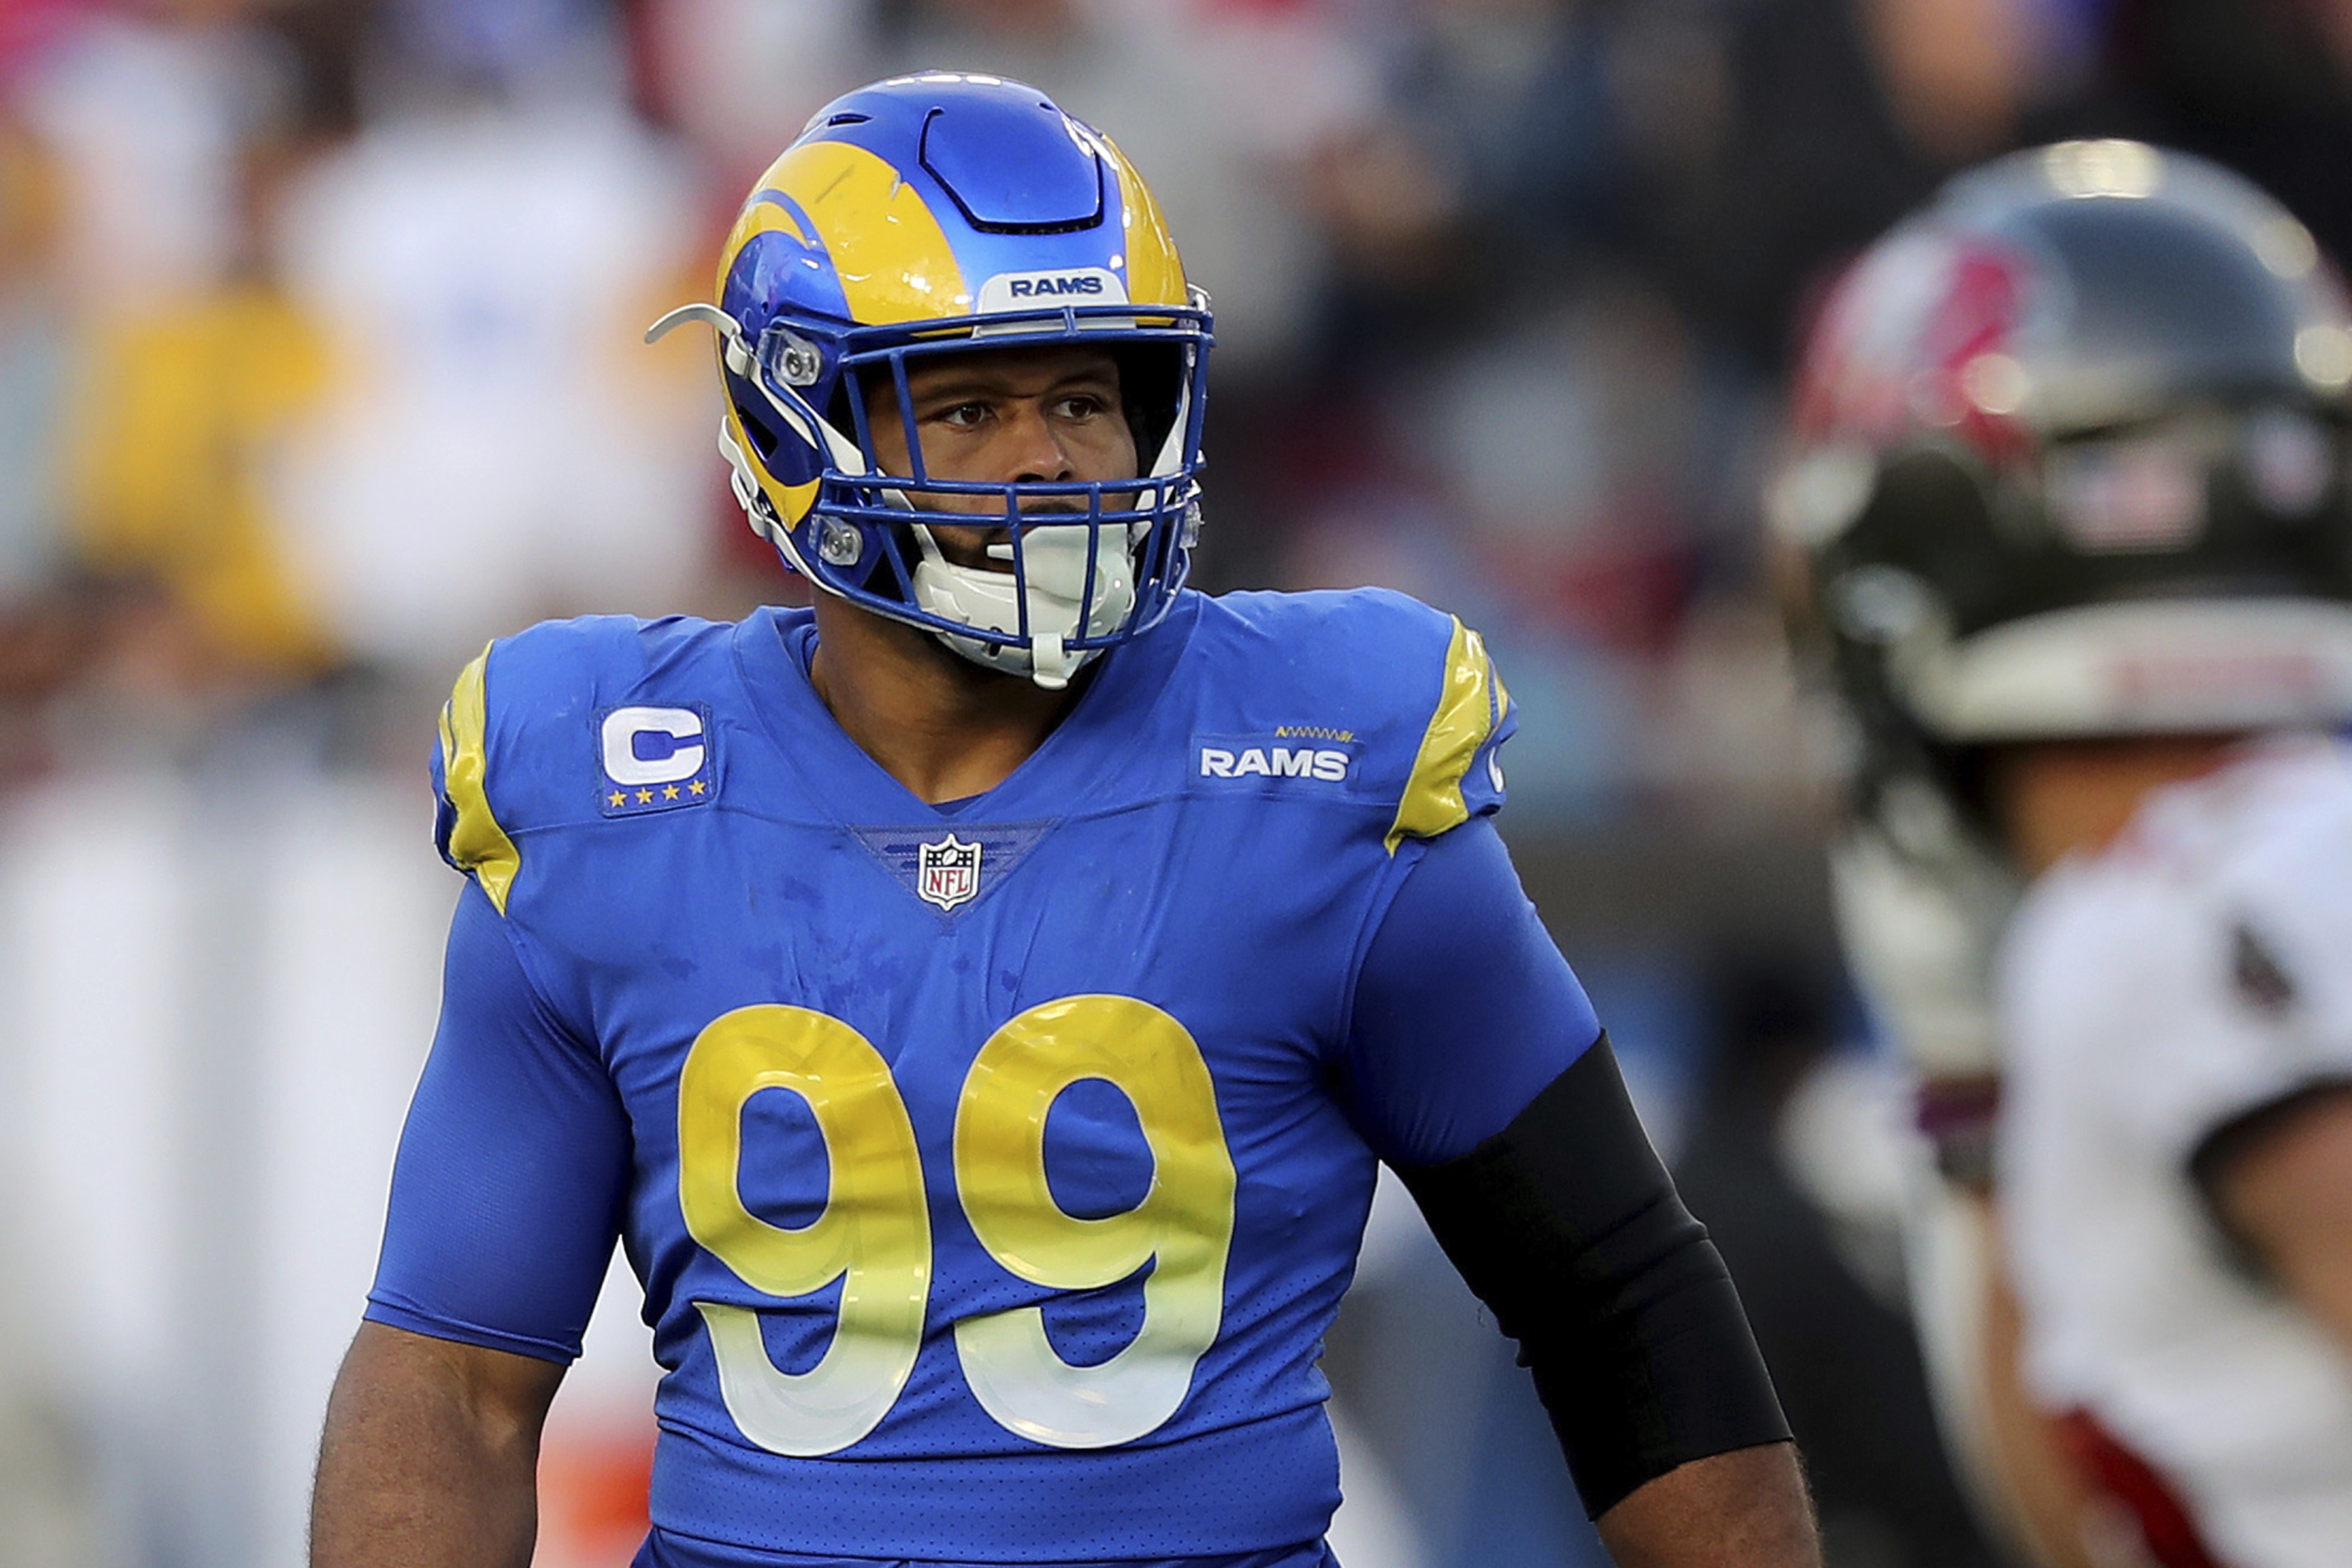 Aaron Donald Undergoing Testing on Ankle Injury, Severity TBD, per